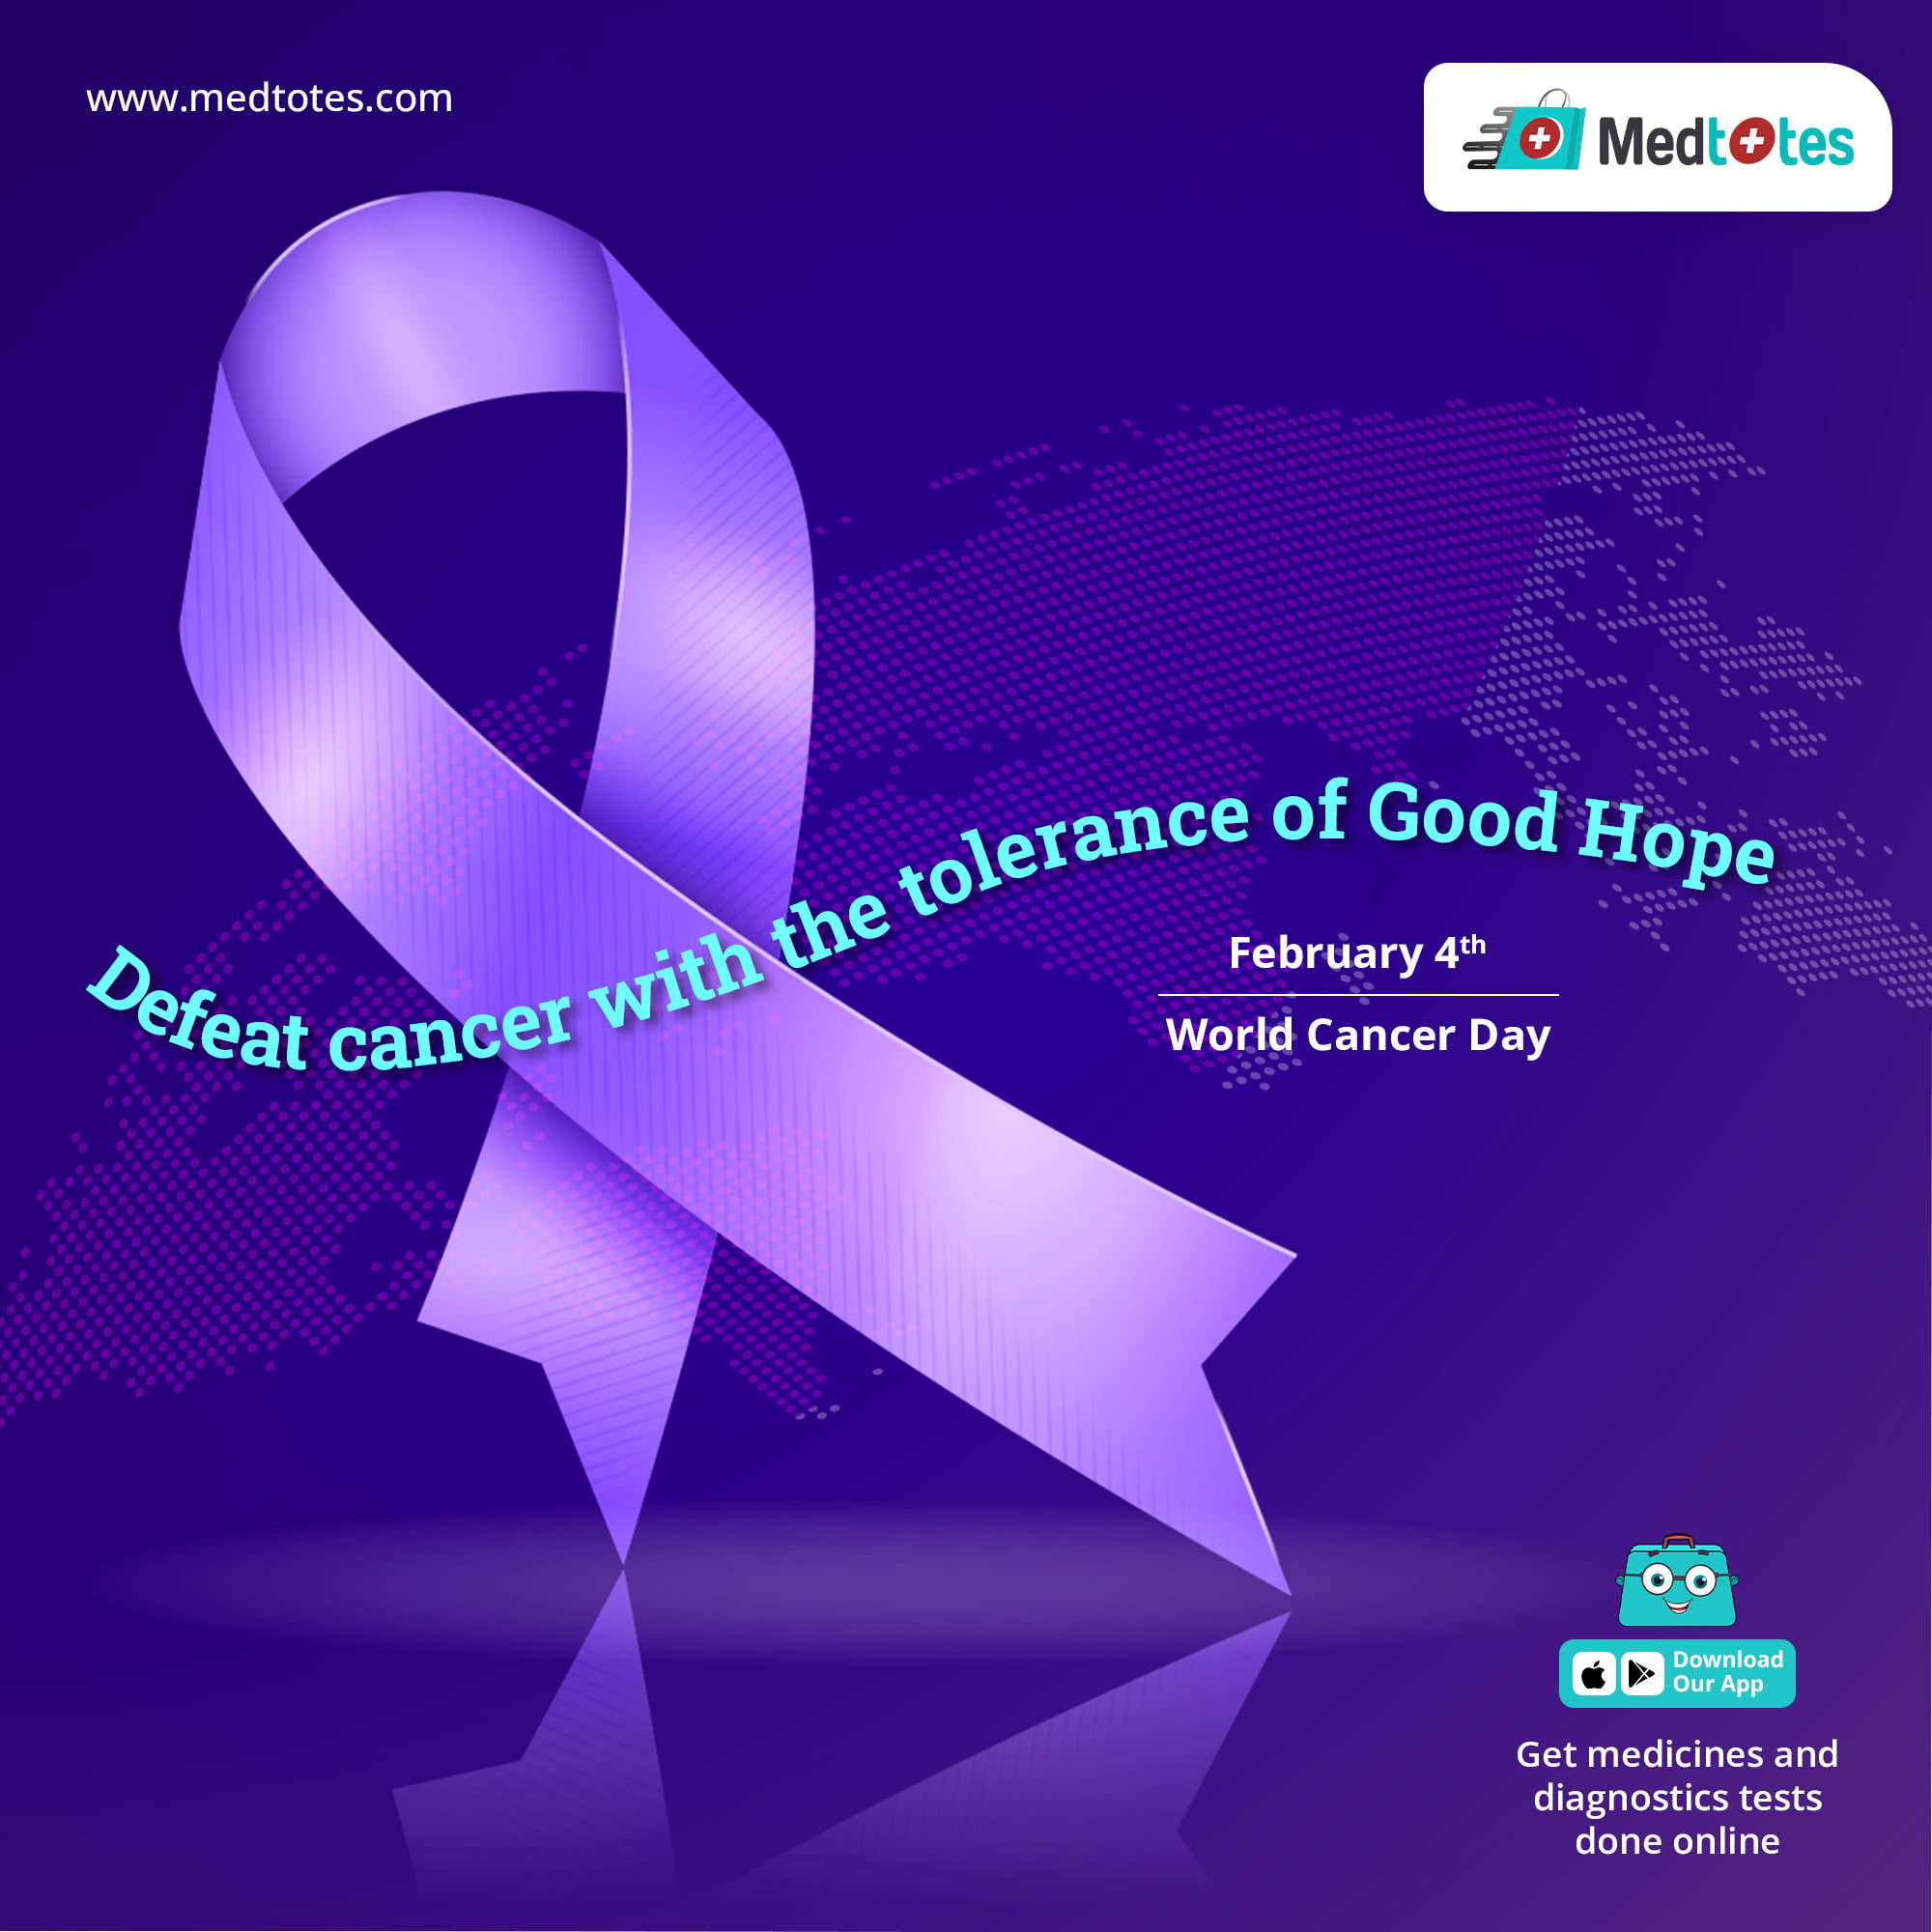 world cancer Day.On this #worldcancerday, let's bring awareness , bring hope, bring knowledge and bring compassion.